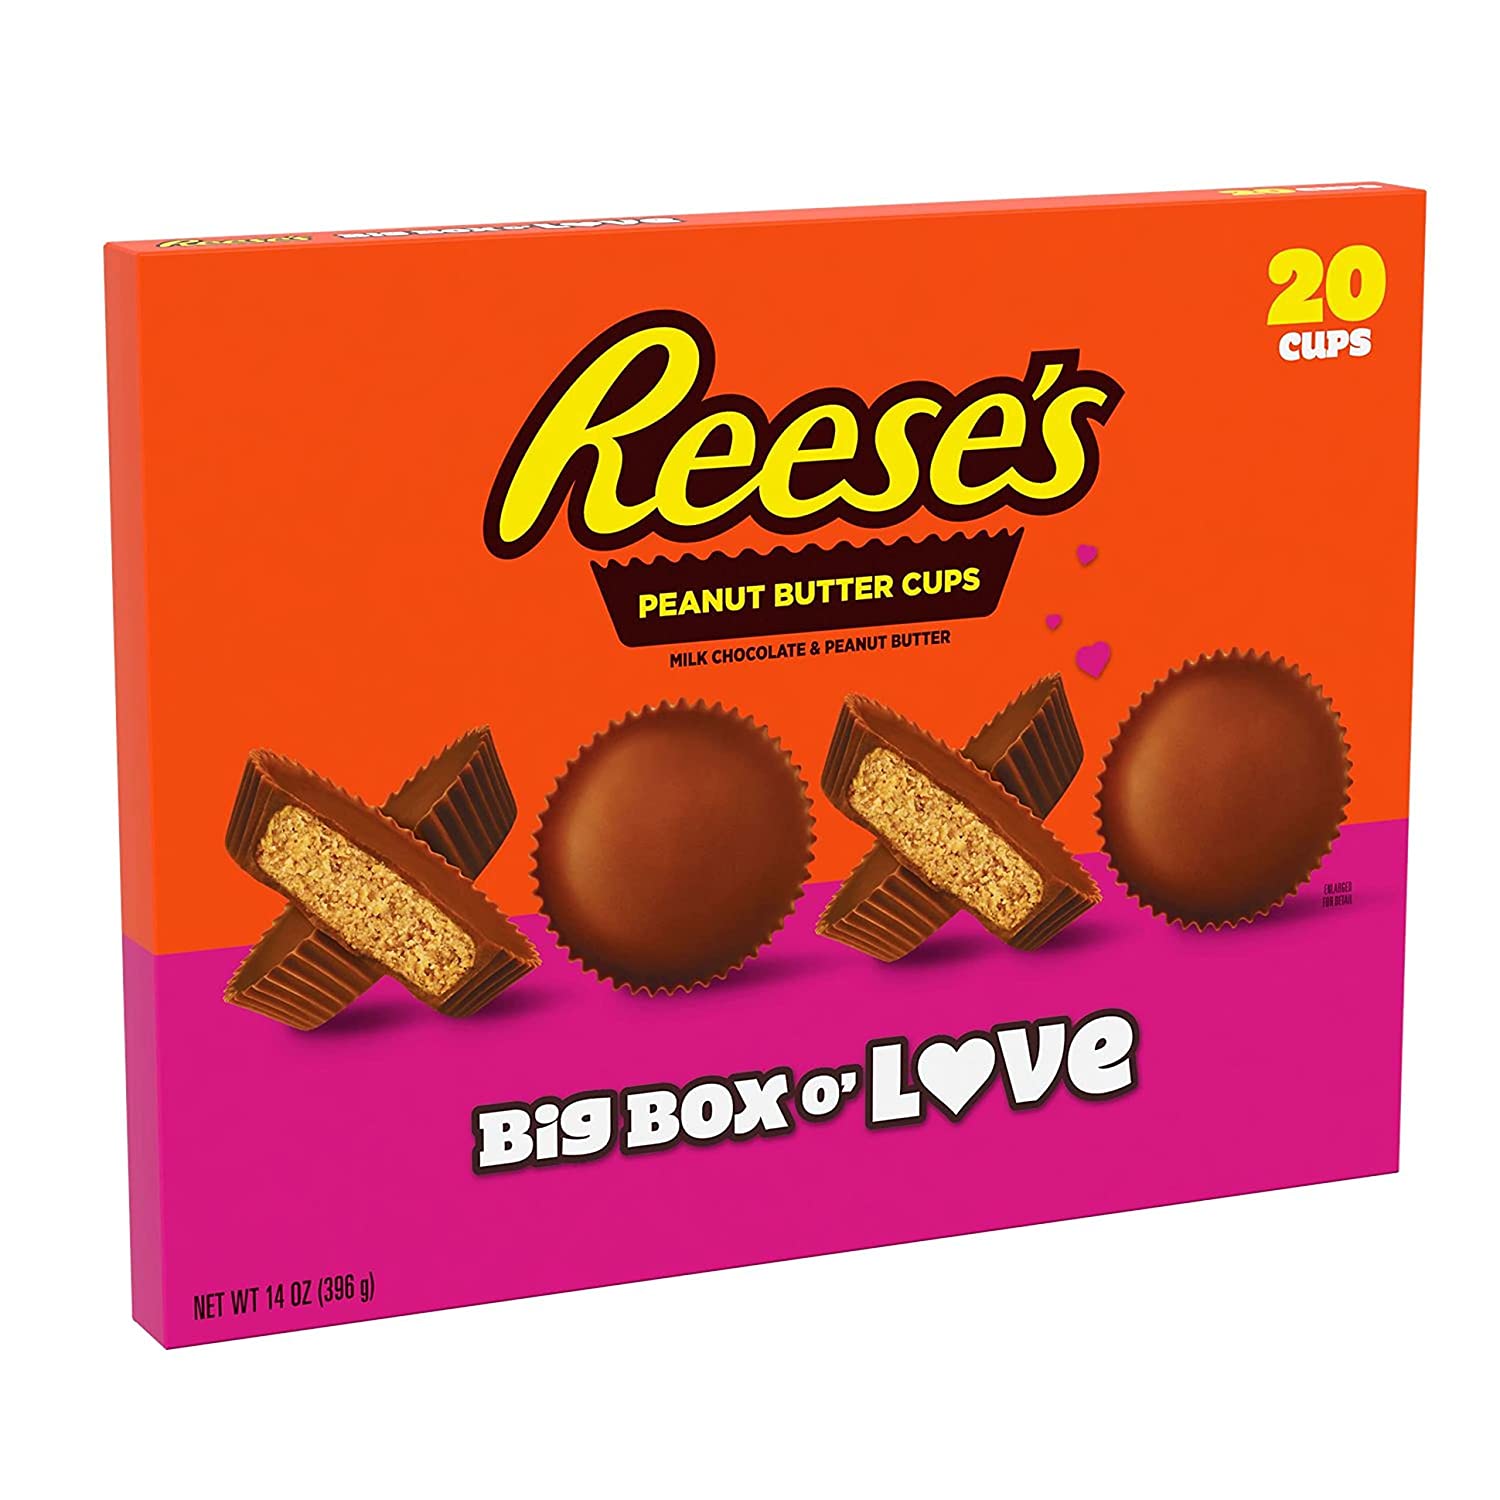 20-Cups 14-Oz REESE'S Big Box o' Love Milk Chocolate Peanut Butter Cups Candy Valentine's Day Gift Box $10.49 + Free Shipping w/ Prime or on orders over $25